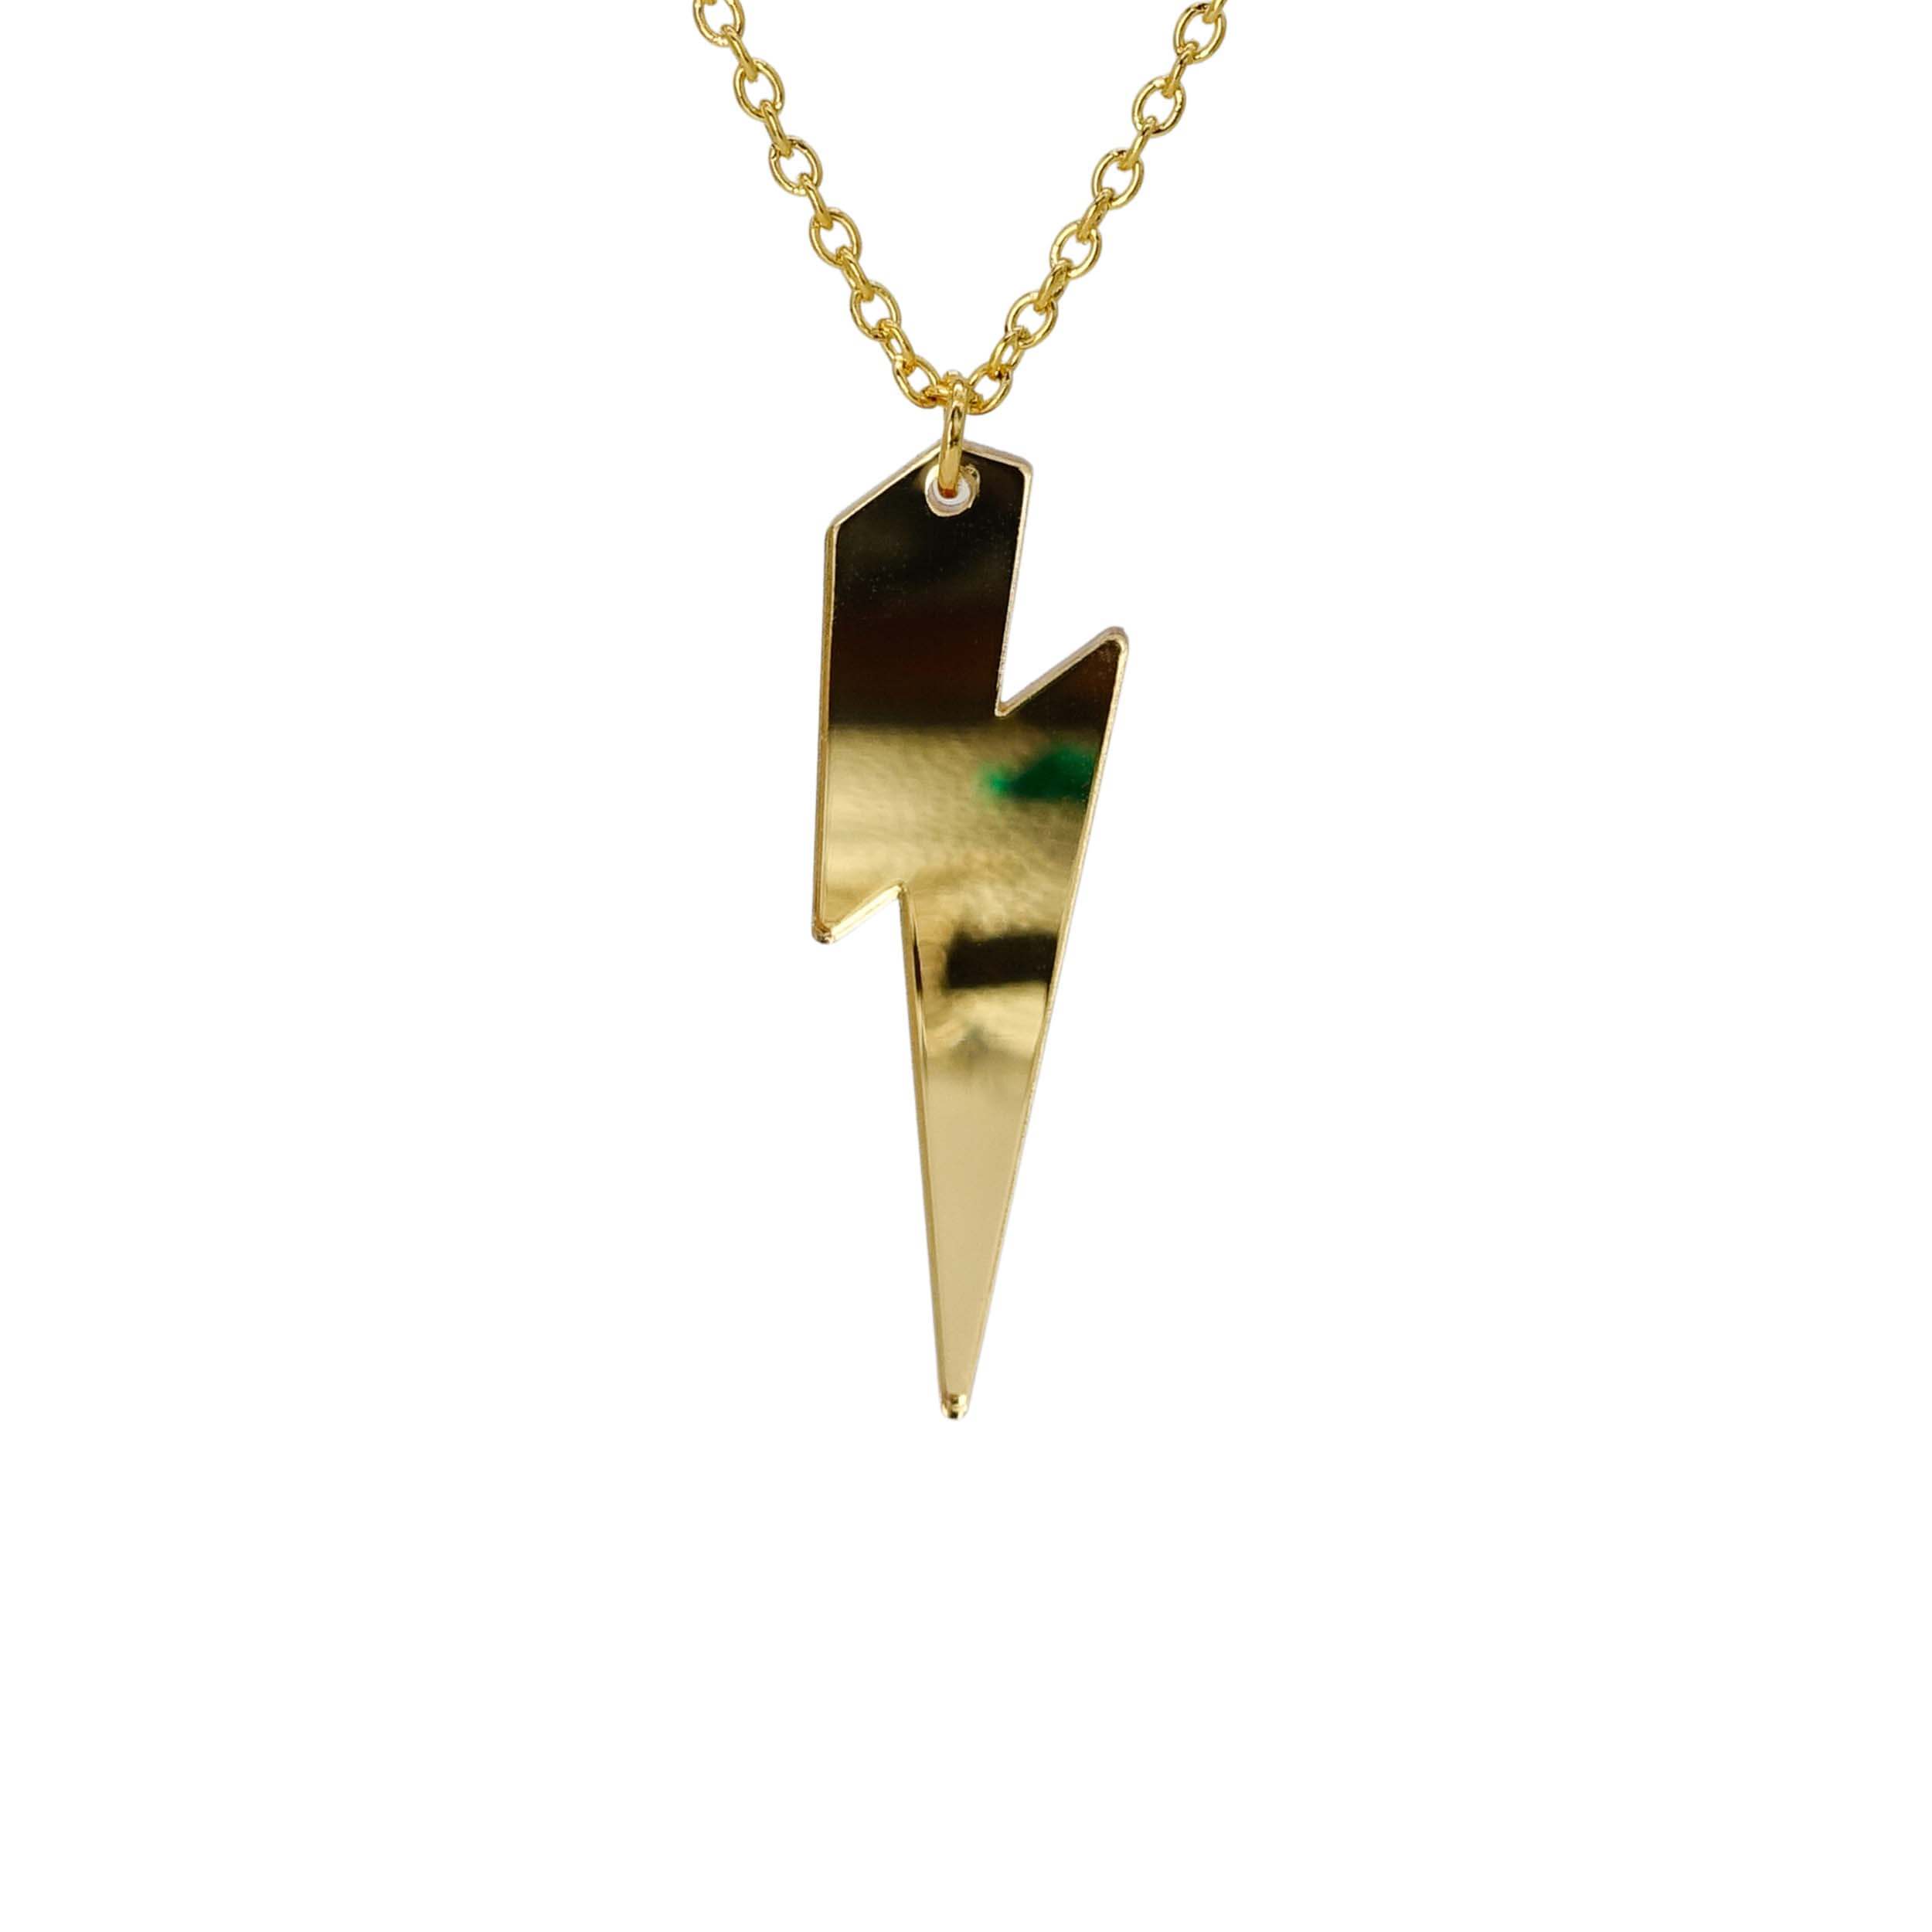 Gold mirror Lightning Bolt necklace shown hanging against a white background. 